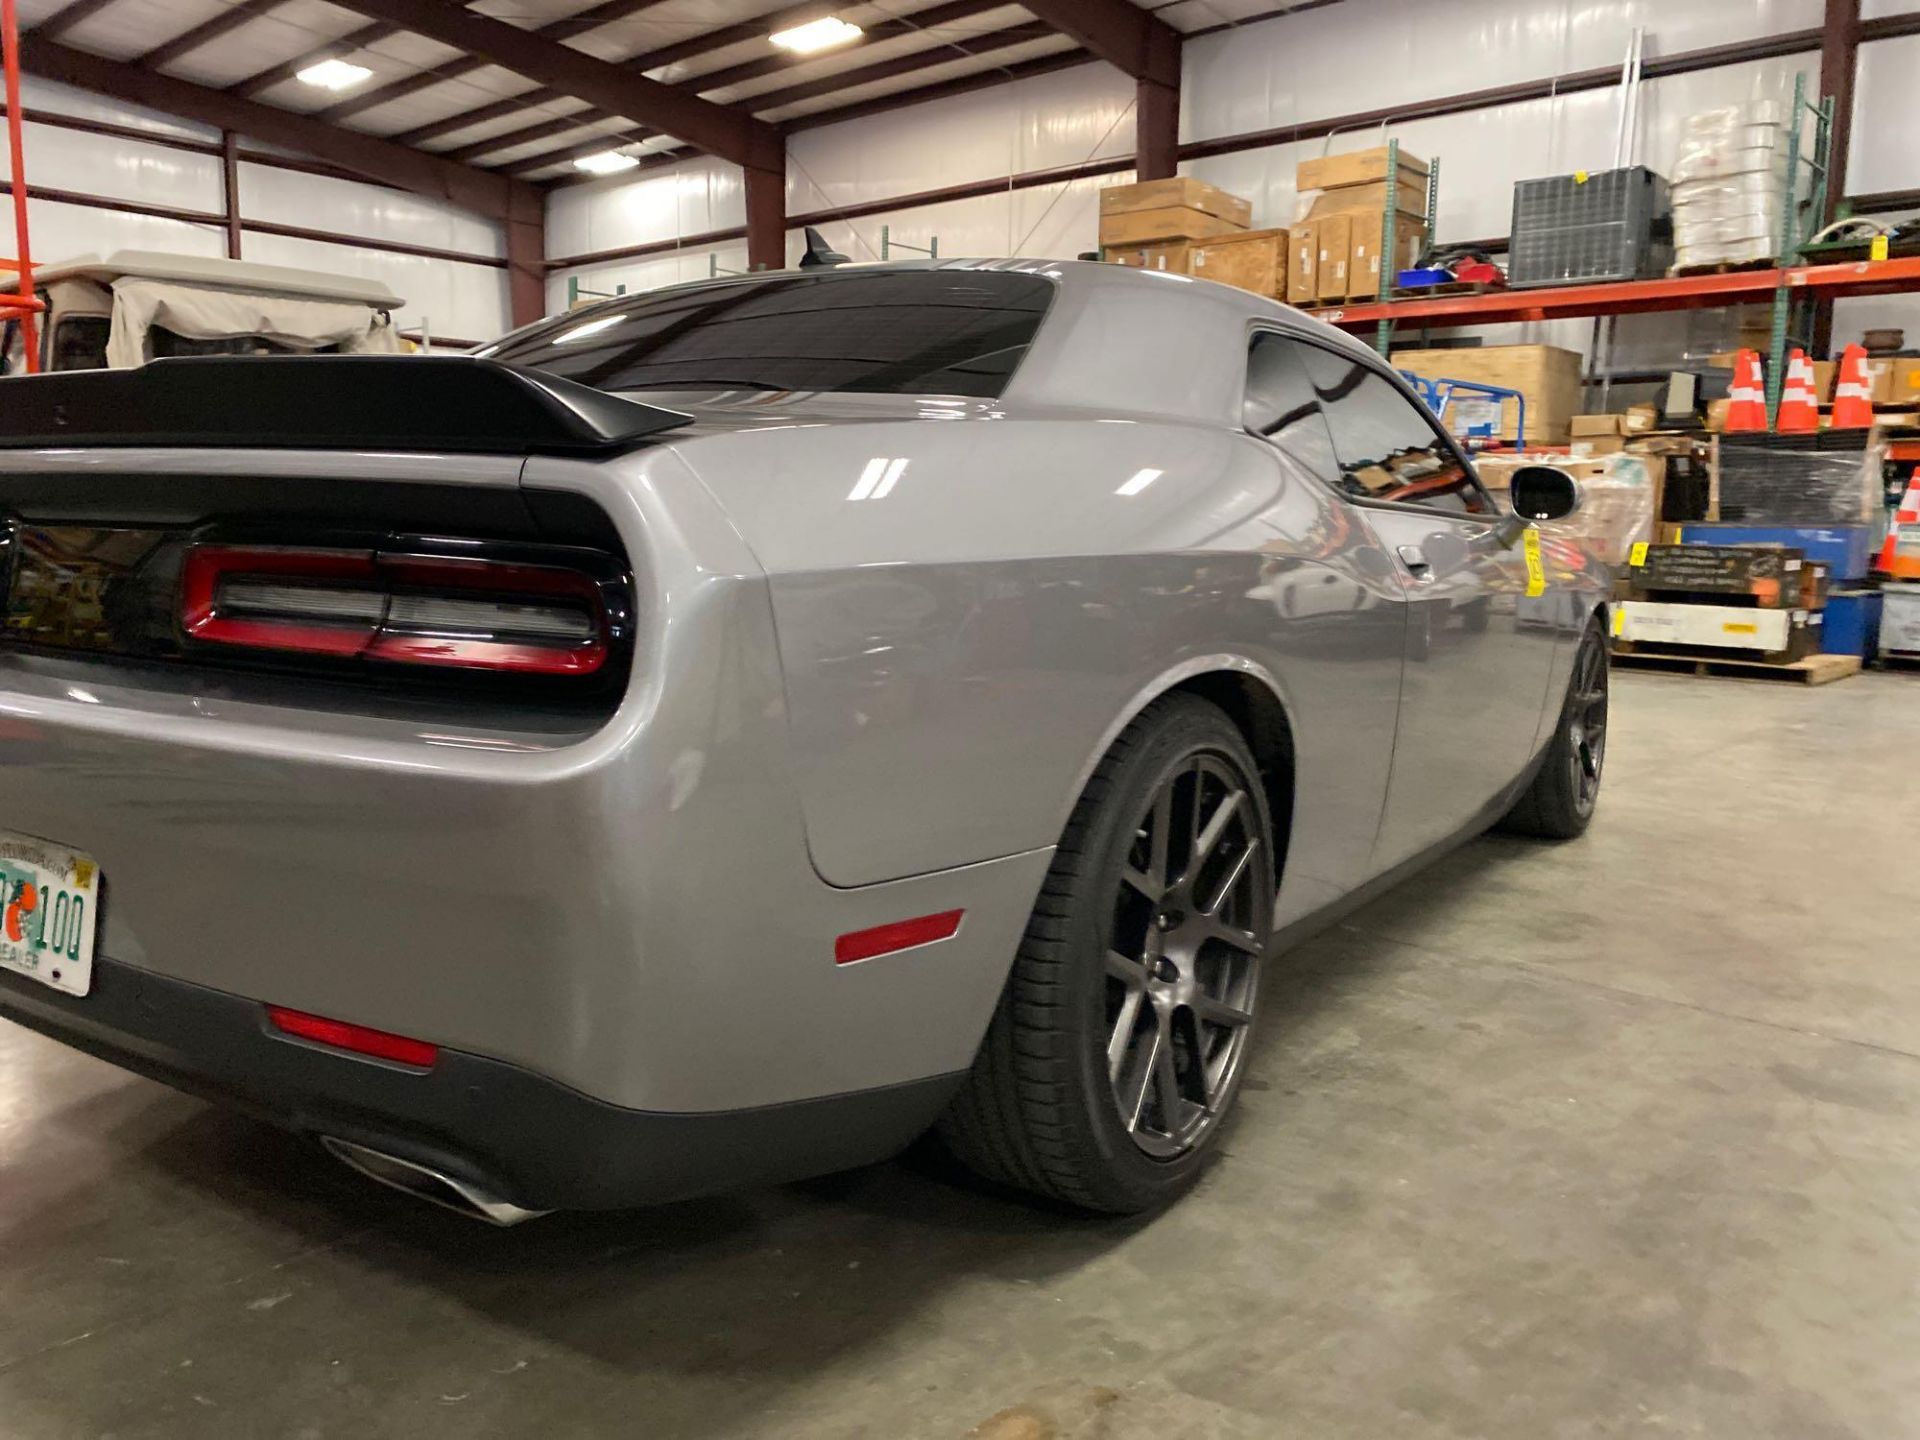 2016 DODGE CHALLENGER WITH SCAT PACK/ SHAKER PACKAGE, APPROX 9,850 MILES SHOWING, RUNS AND OPERATES - Image 8 of 26